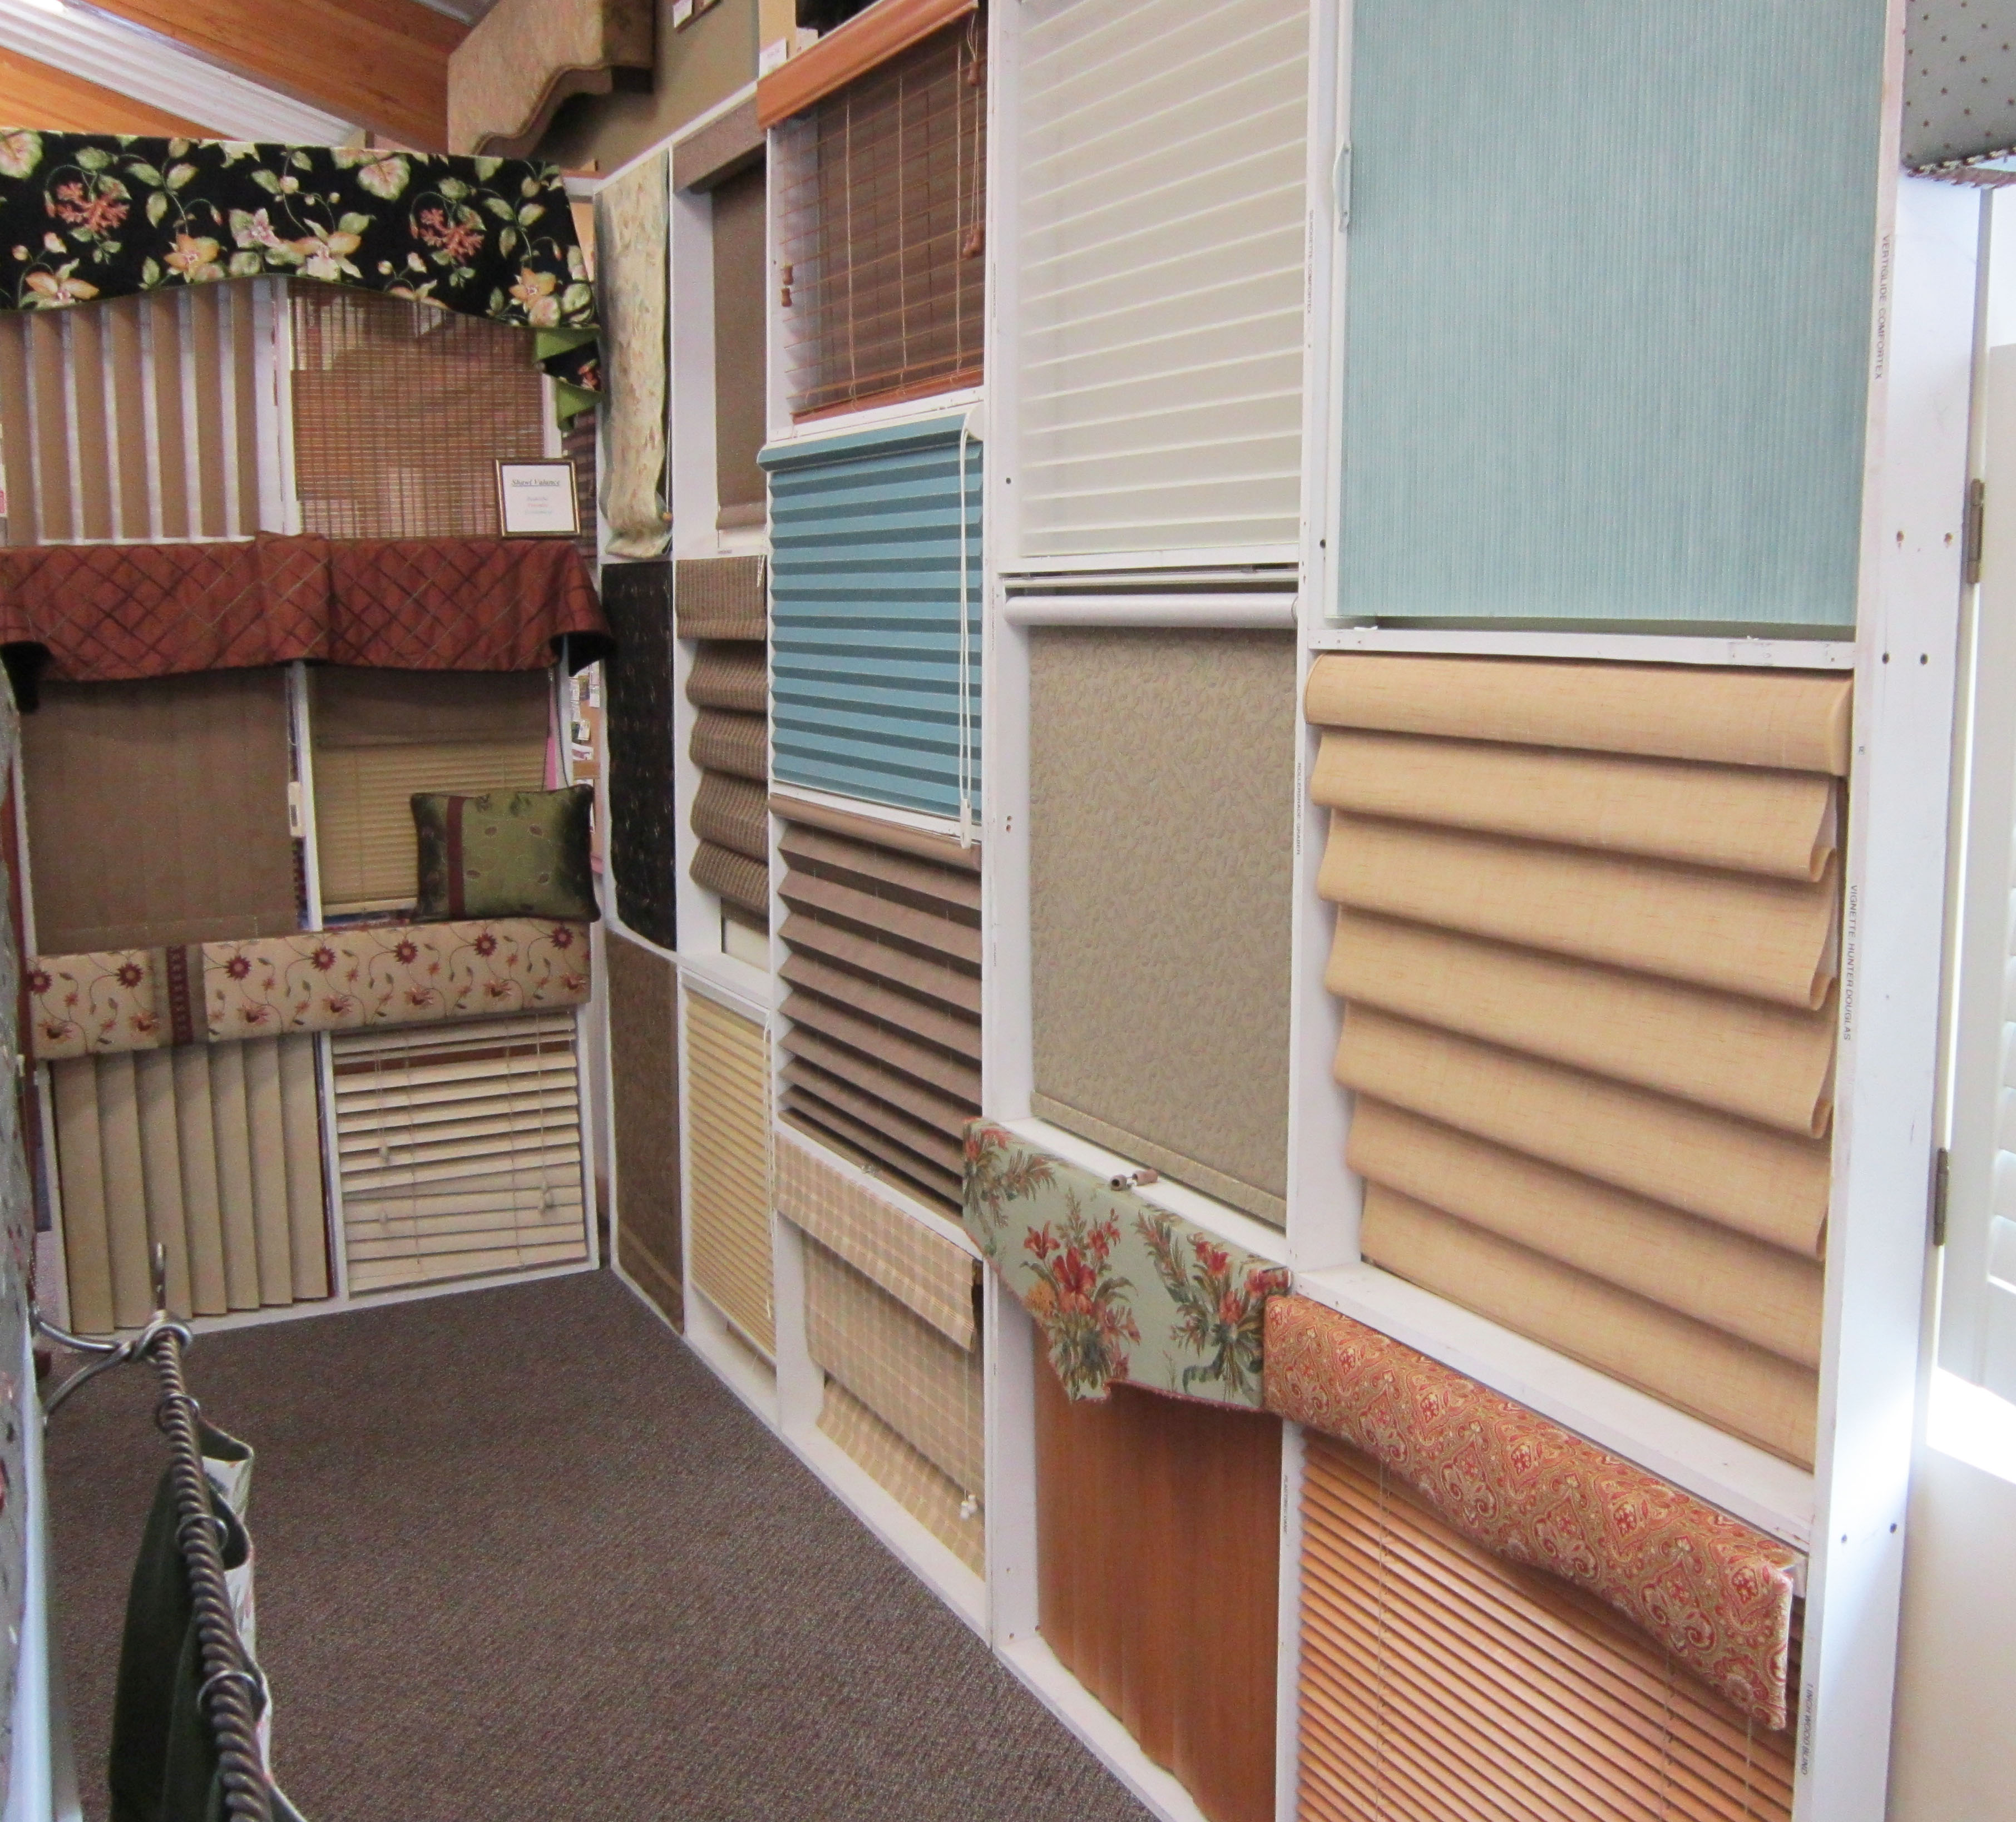 In Our Showroom We Display Numerous Types Of Blinds And Shades So